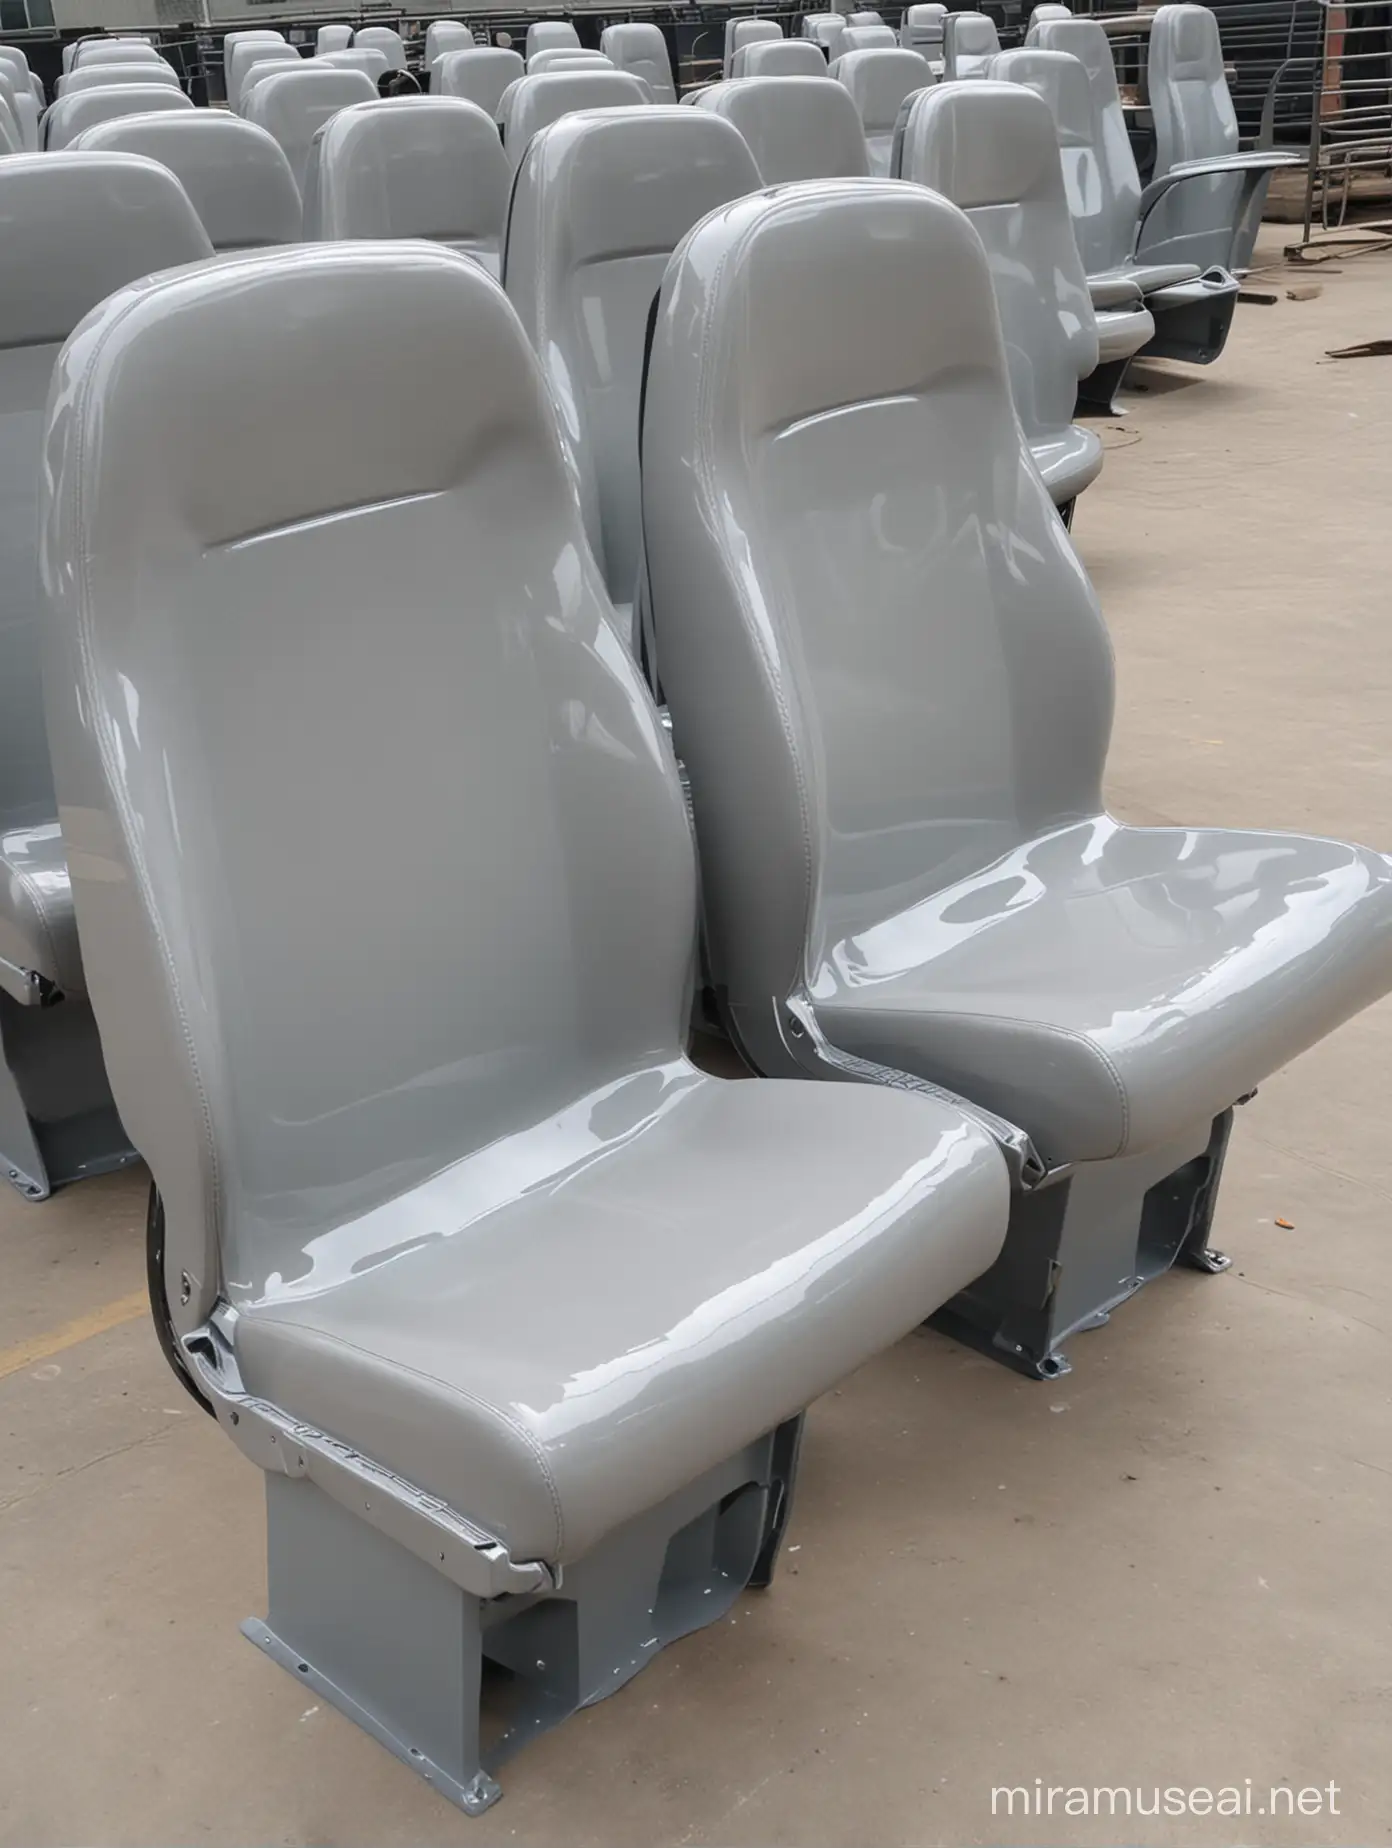 fiberglass grey comfortable seats for a bus, high quality, high resolution glossy finish